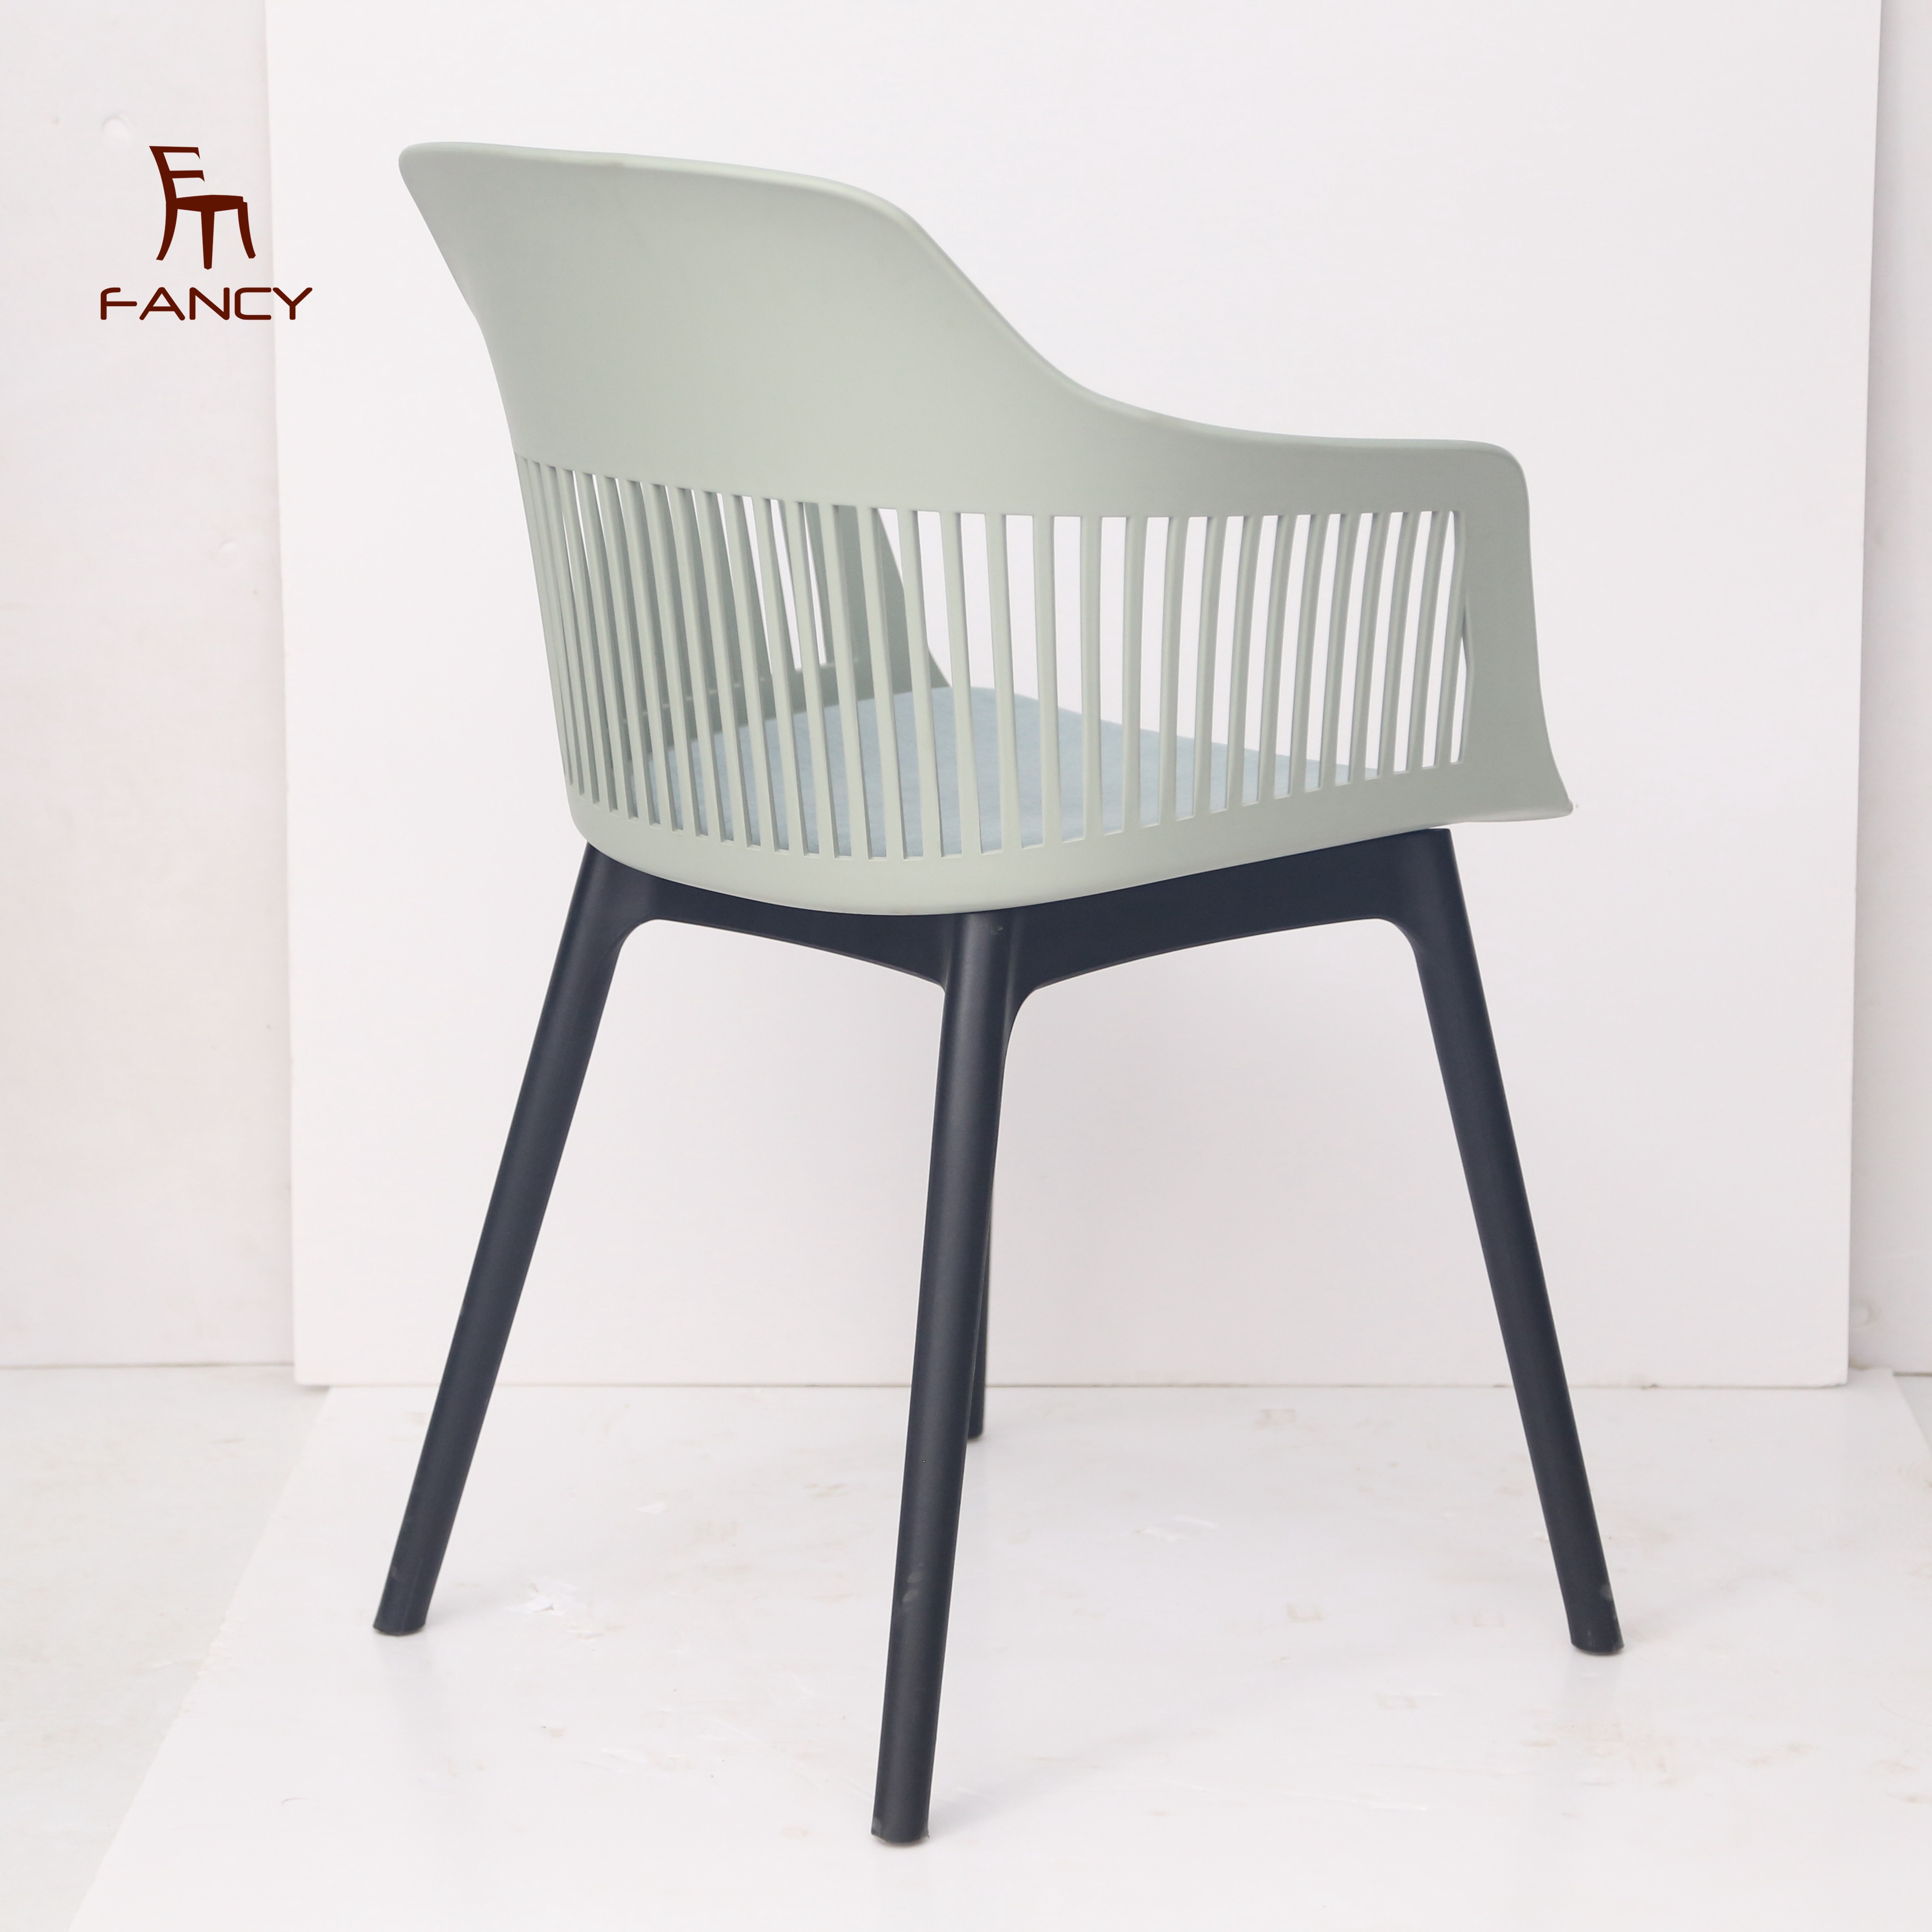 New Style Colorful Plastic Outdoor Chair Dining Restaurant Cafe Plastic Chair 